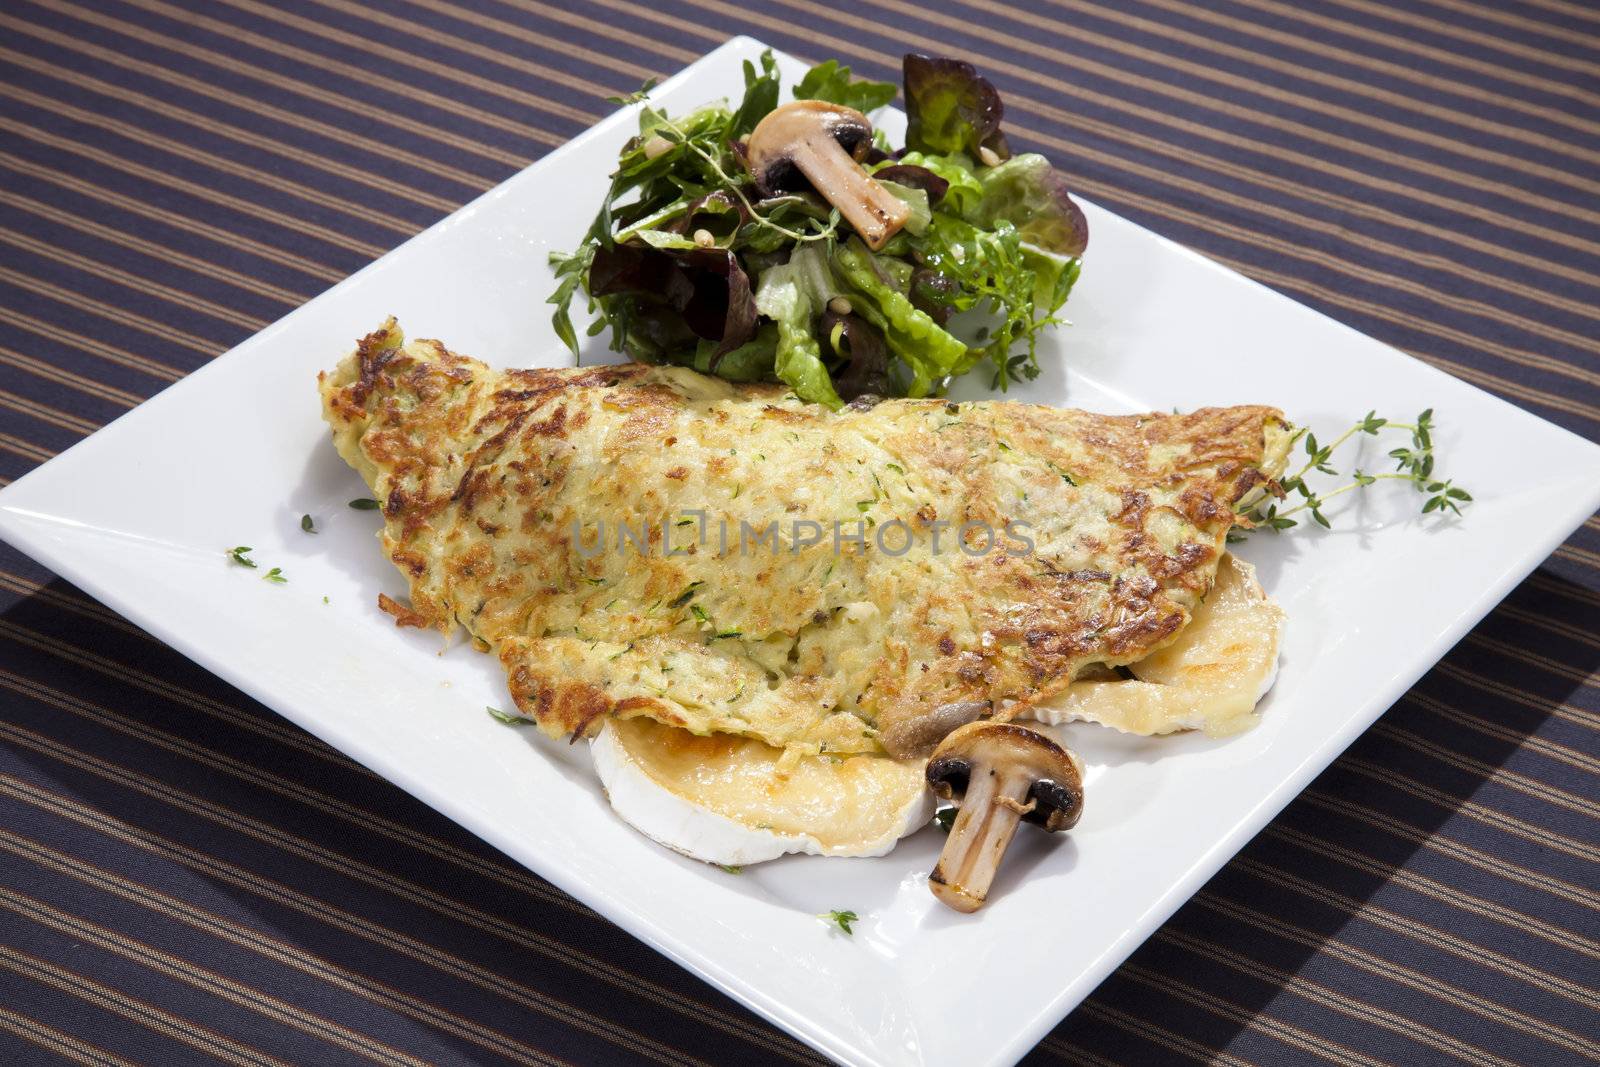 Potato pancake filled by grilled camembert and mushrooms